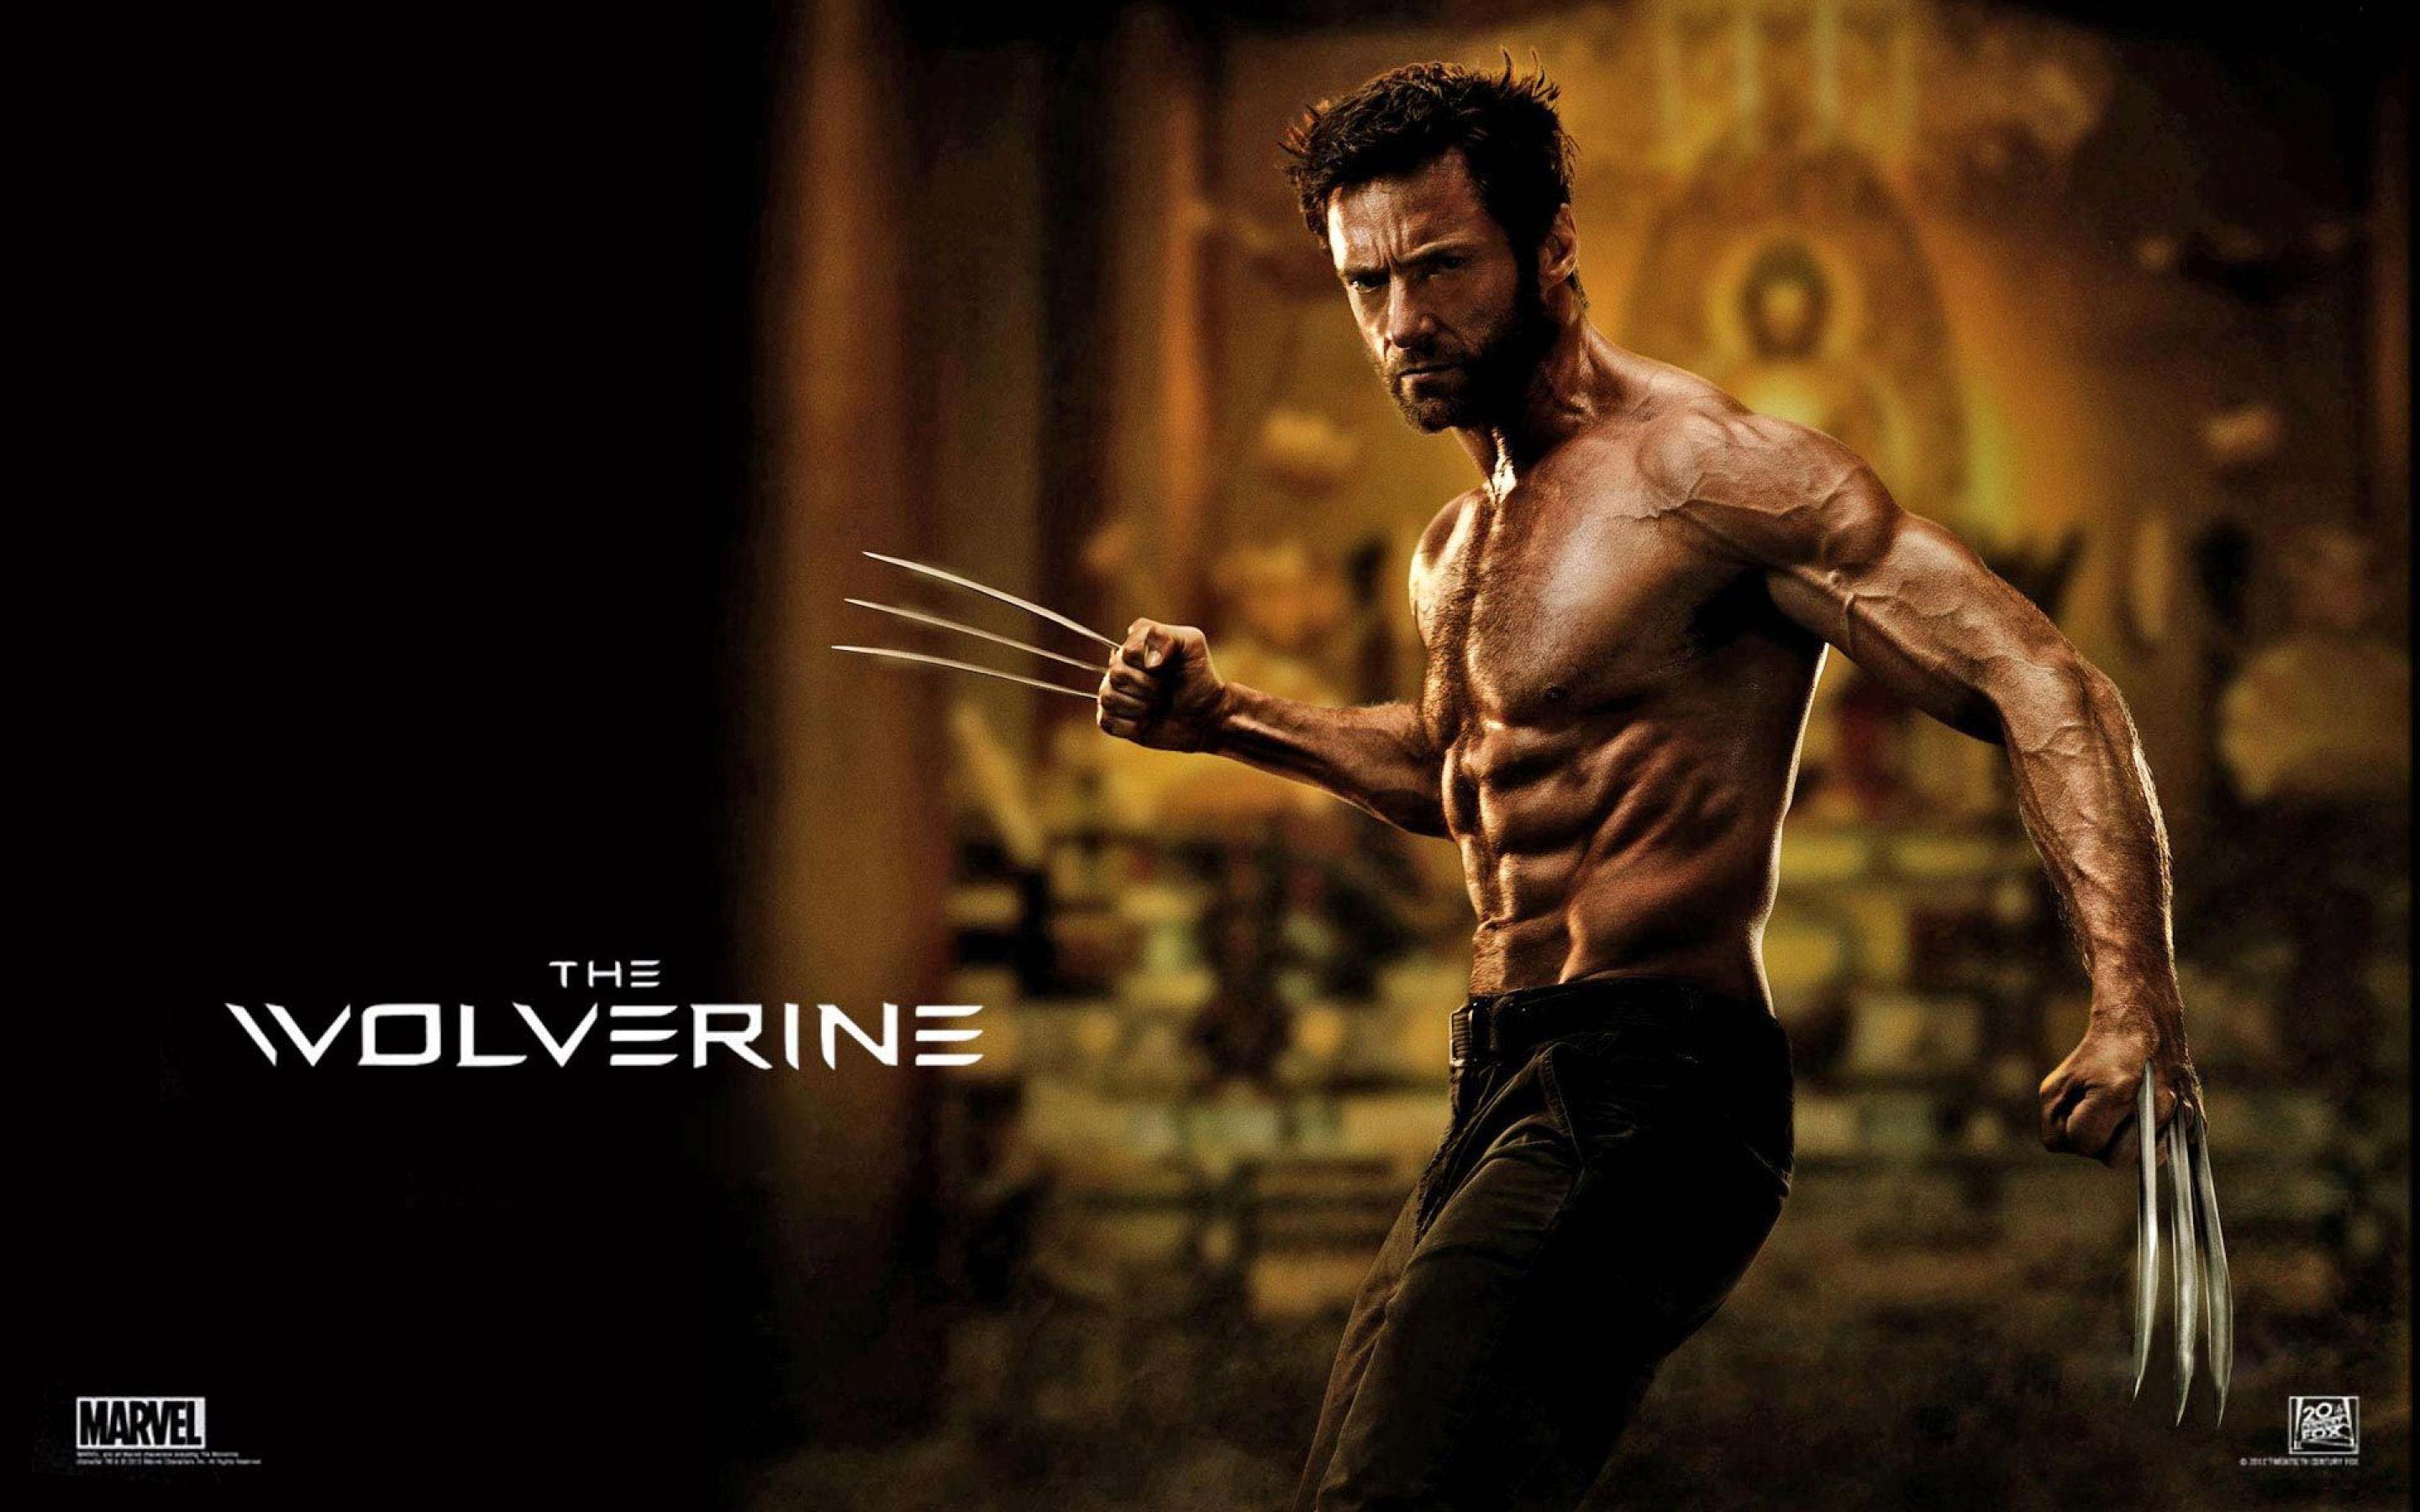 Free Download Hugh Jackman X Men Wolverine Wallpapers Hd Collection 2880x1800 For Your Desktop Mobile Tablet Explore 75 Wallpaper Wolverine X Men X Men Wolverine Wallpaper Wallpaper Wolverine X